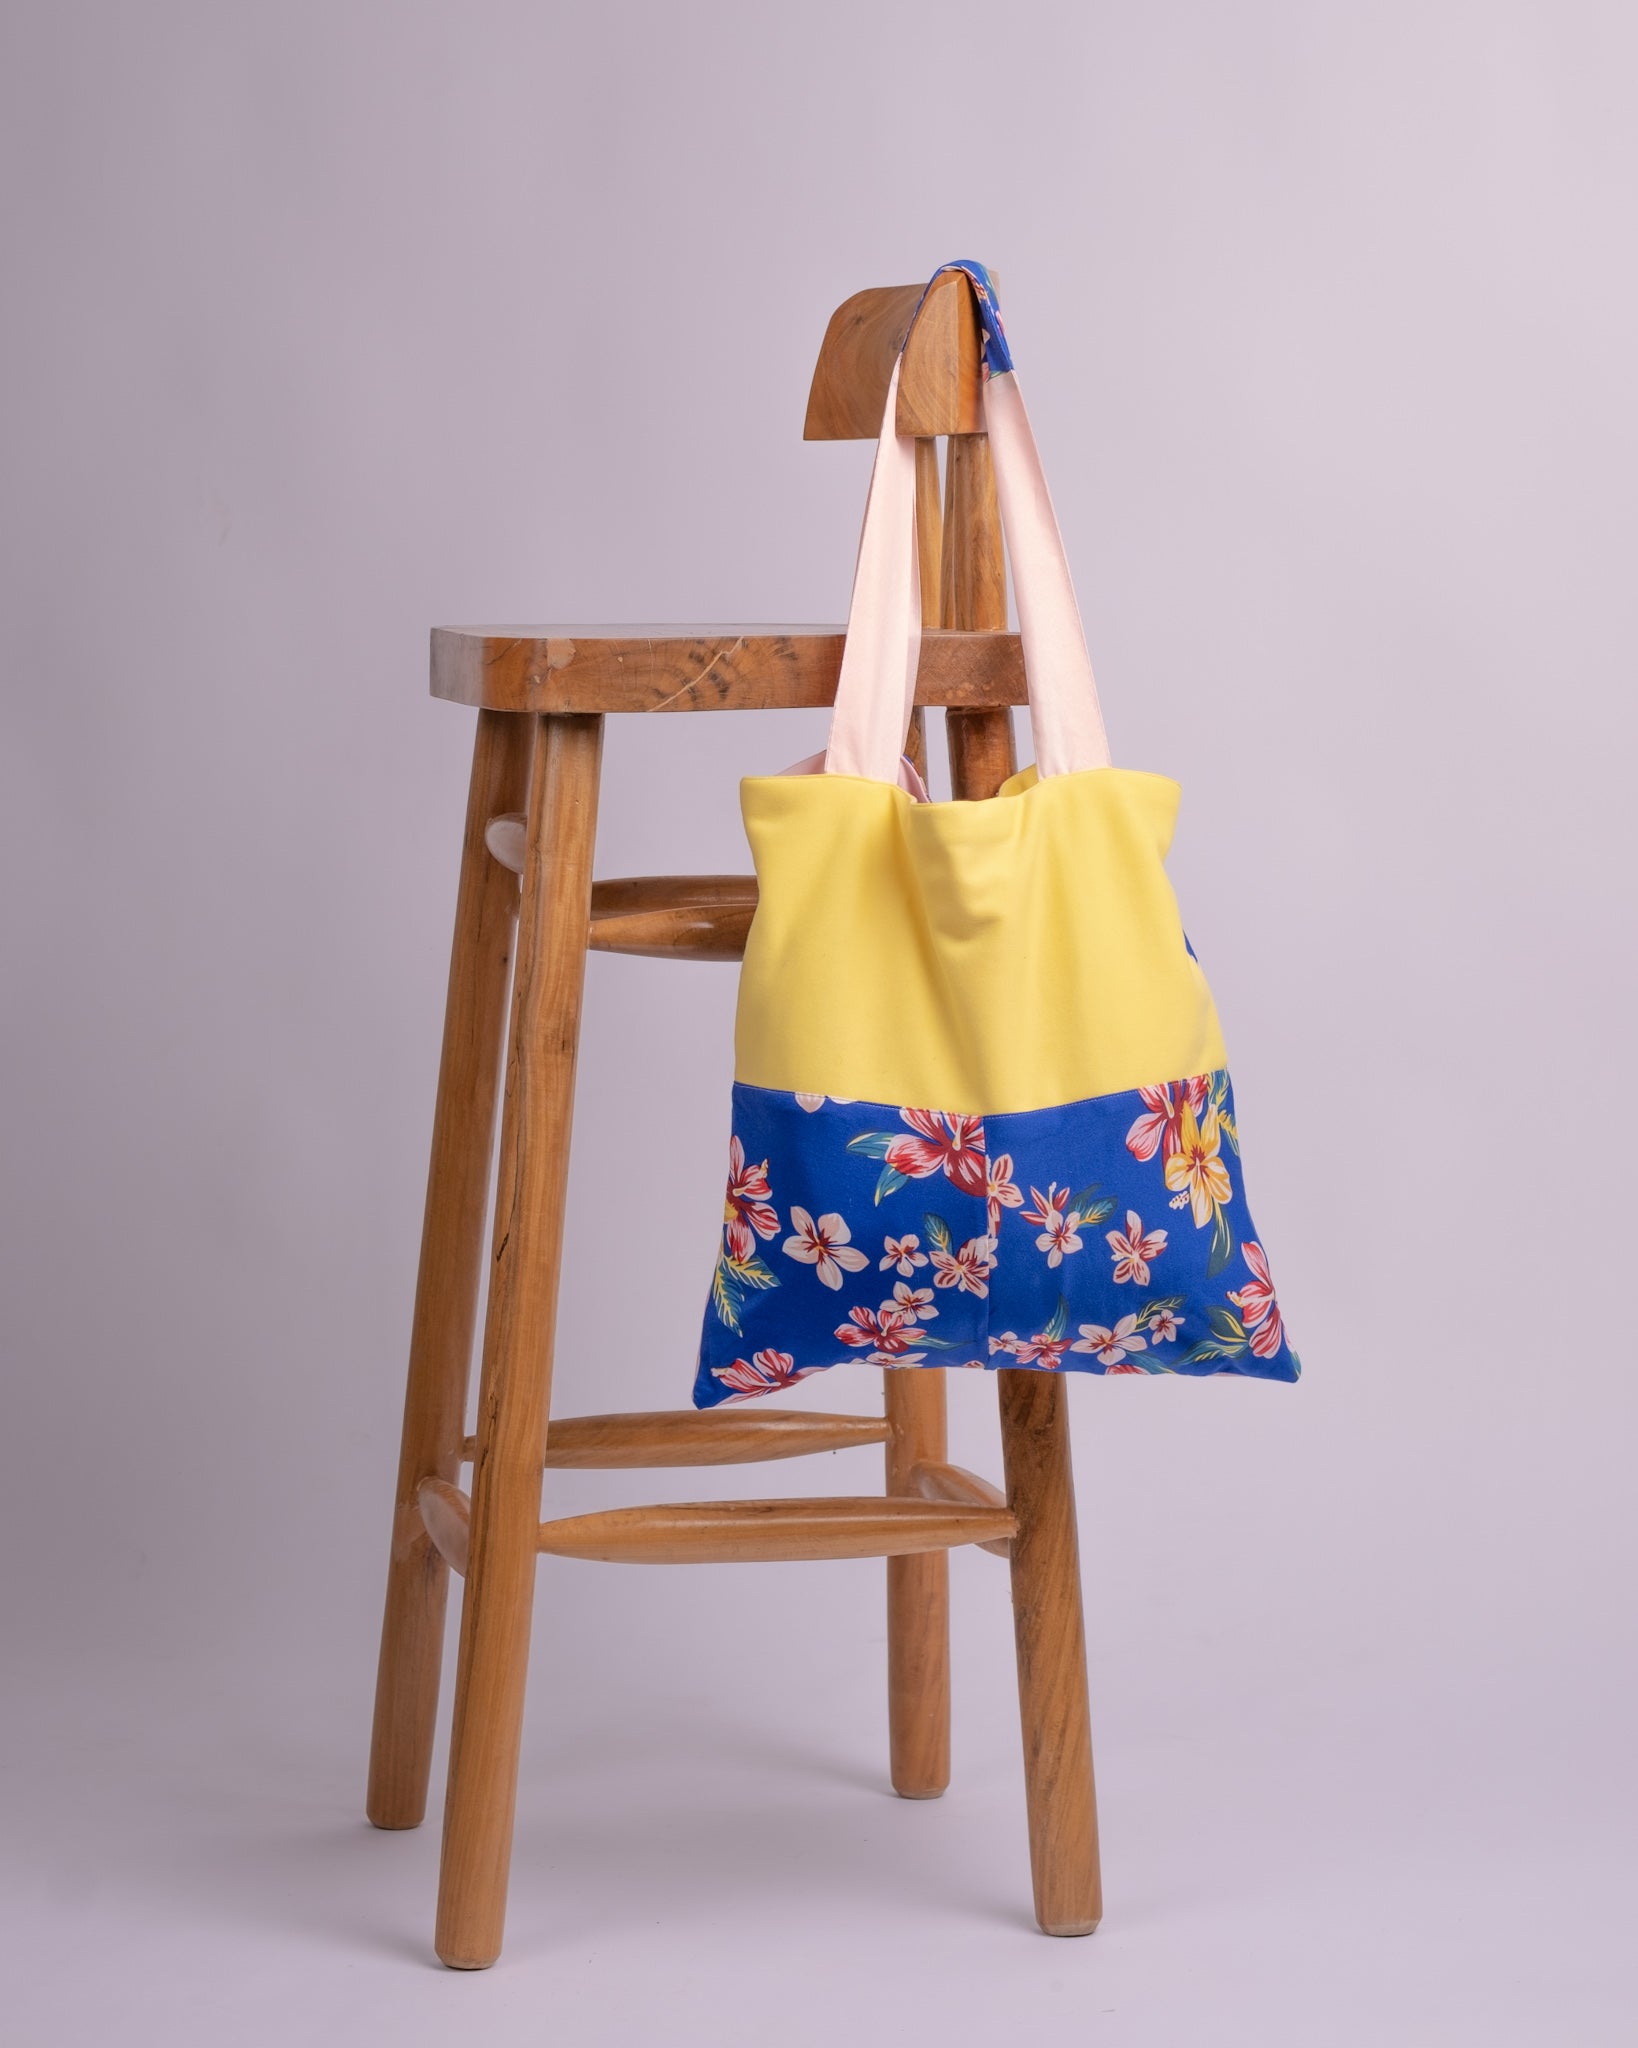 For Beach Days Reversible Tote Bag